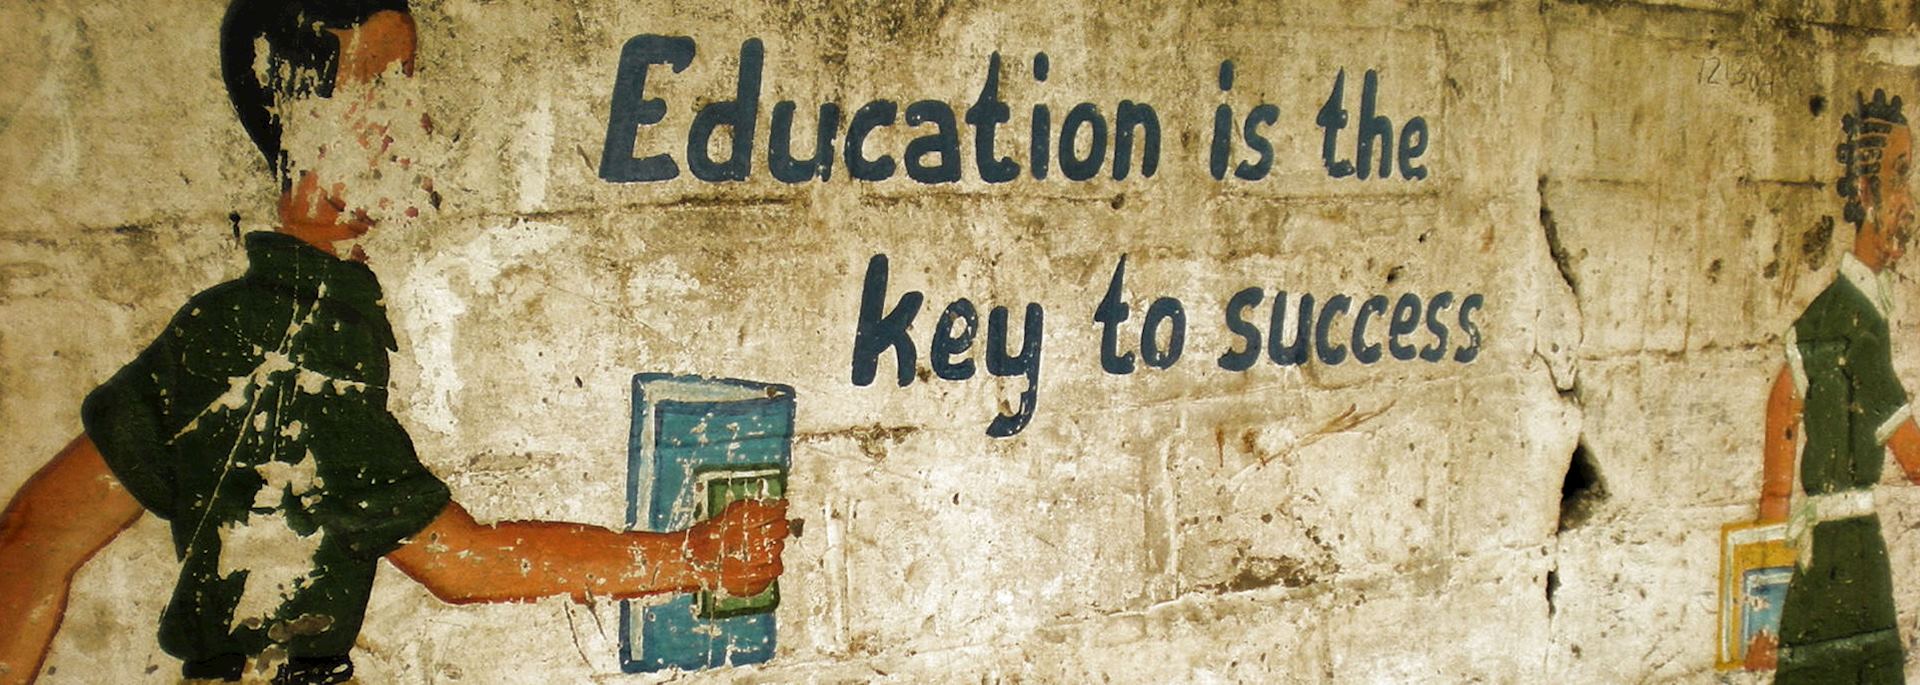 A mural in Africa highlighting the importance of education